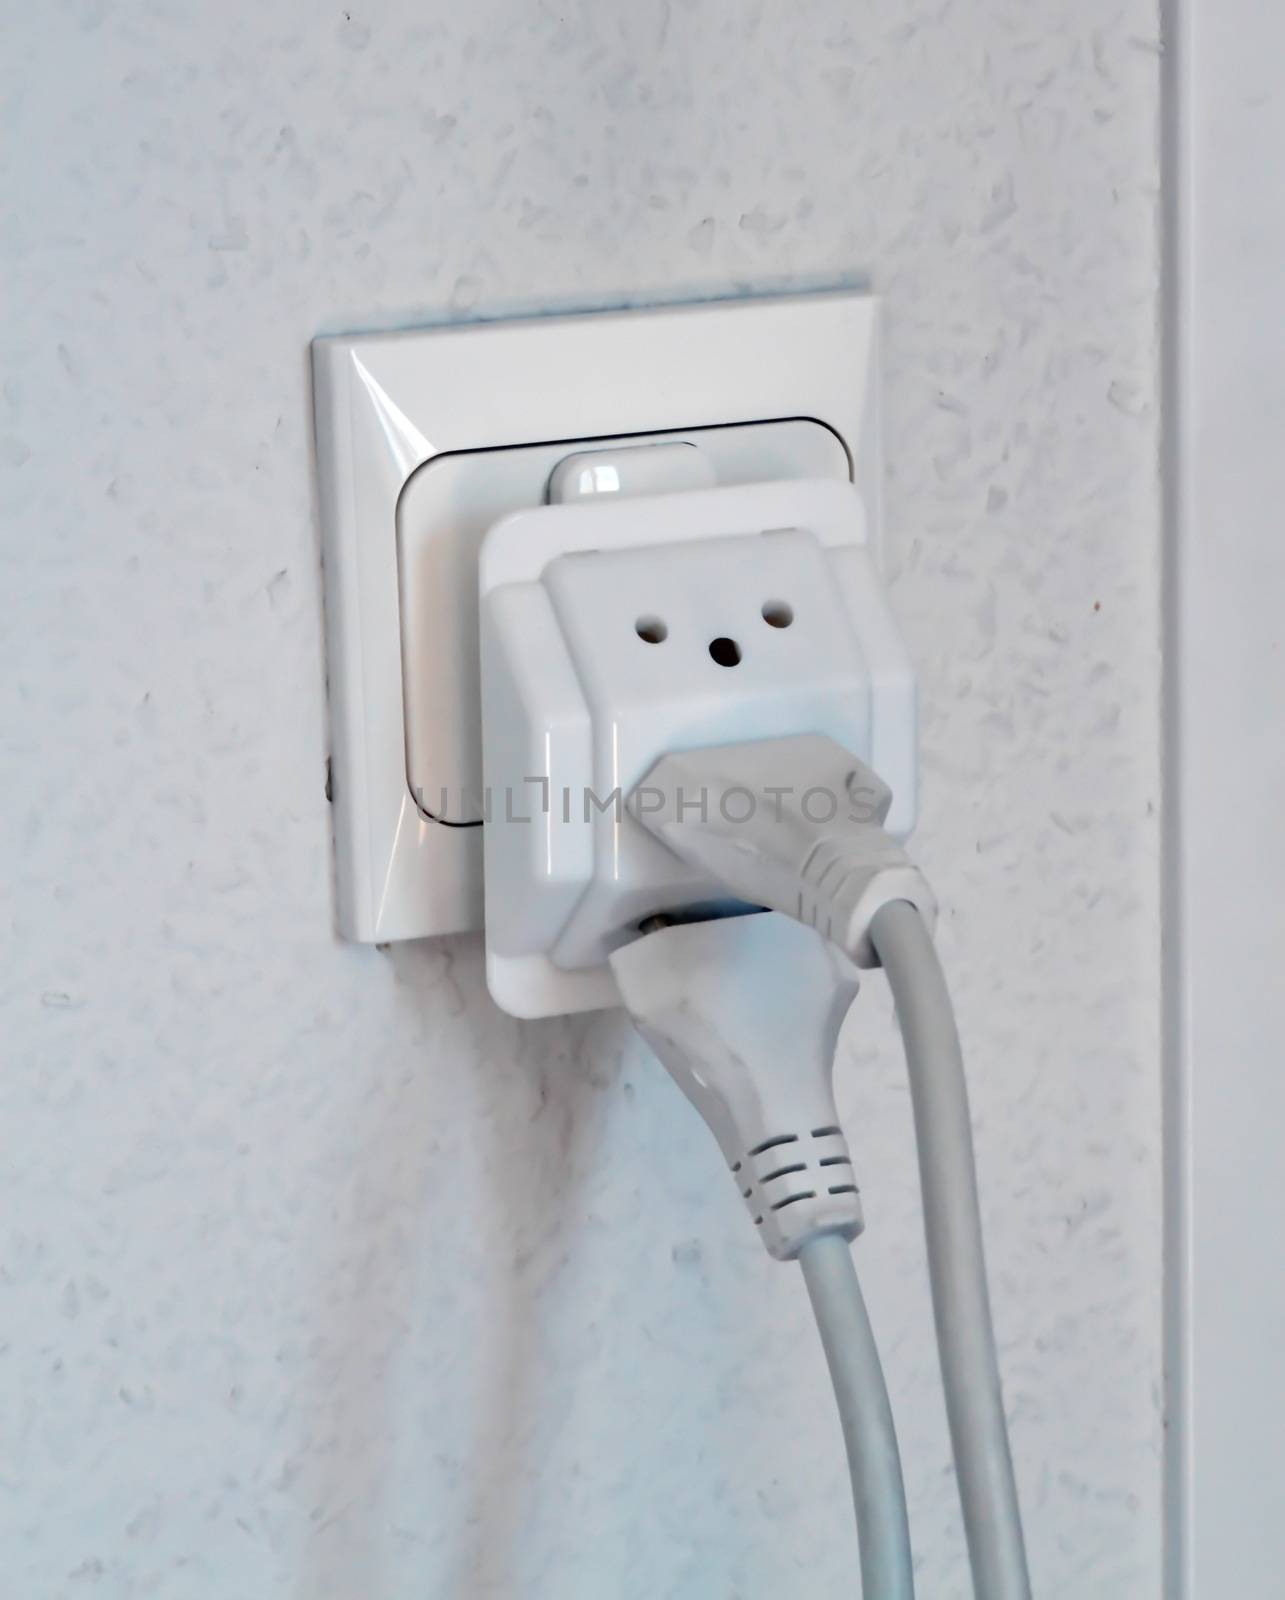 Multiple electrical plugs in wall outlet by Elenaphotos21